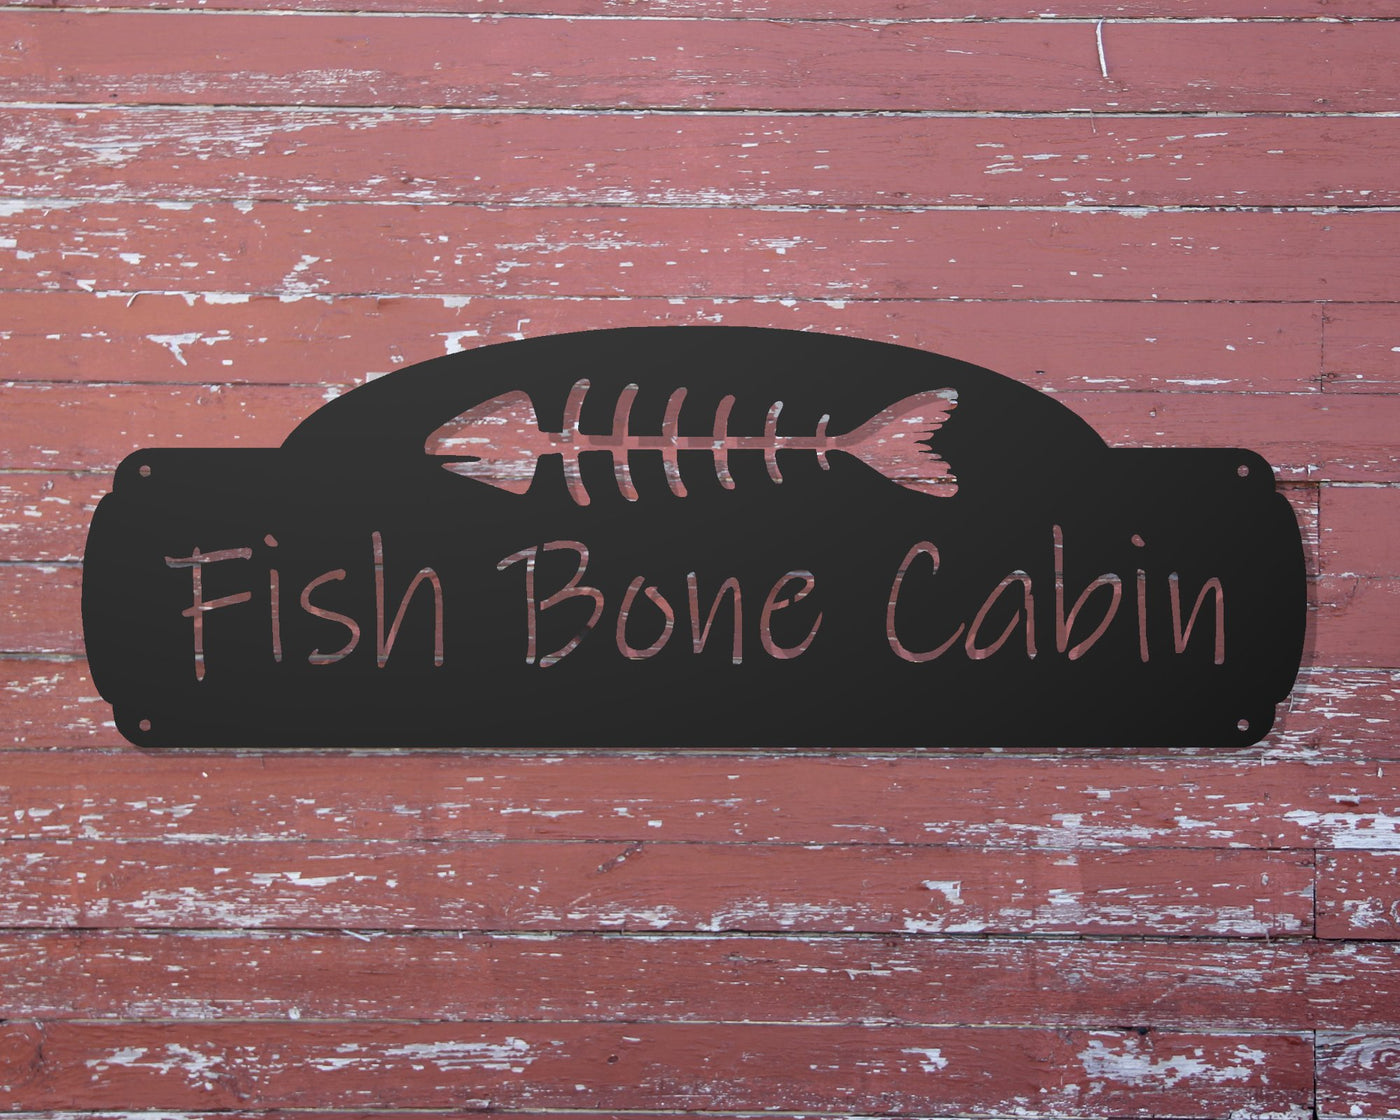 Personalized Fish Bone Cabin Metal Sign - Madison Iron and Wood - Personalized sign - metal outdoor decor - Steel deocrations - american made products - veteran owned business products - fencing decorations - fencing supplies - custom wall decorations - personalized wall signs - steel - decorative post caps - steel post caps - metal post caps - brackets - structural brackets - home improvement - easter - easter decorations - easter gift - easter yard decor